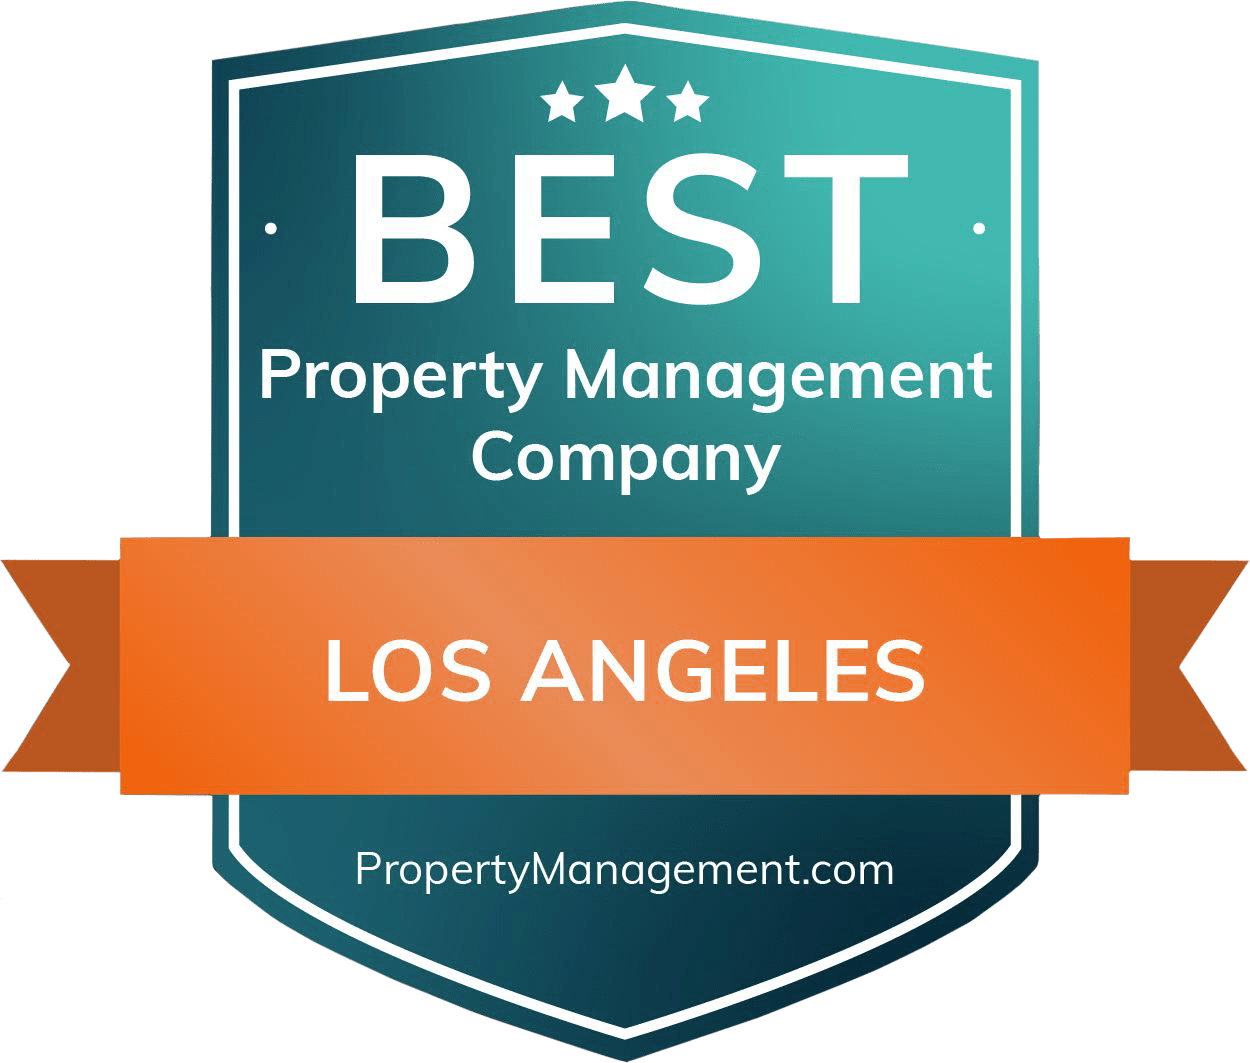 Best Property Management in Los Angeles 2020 badge